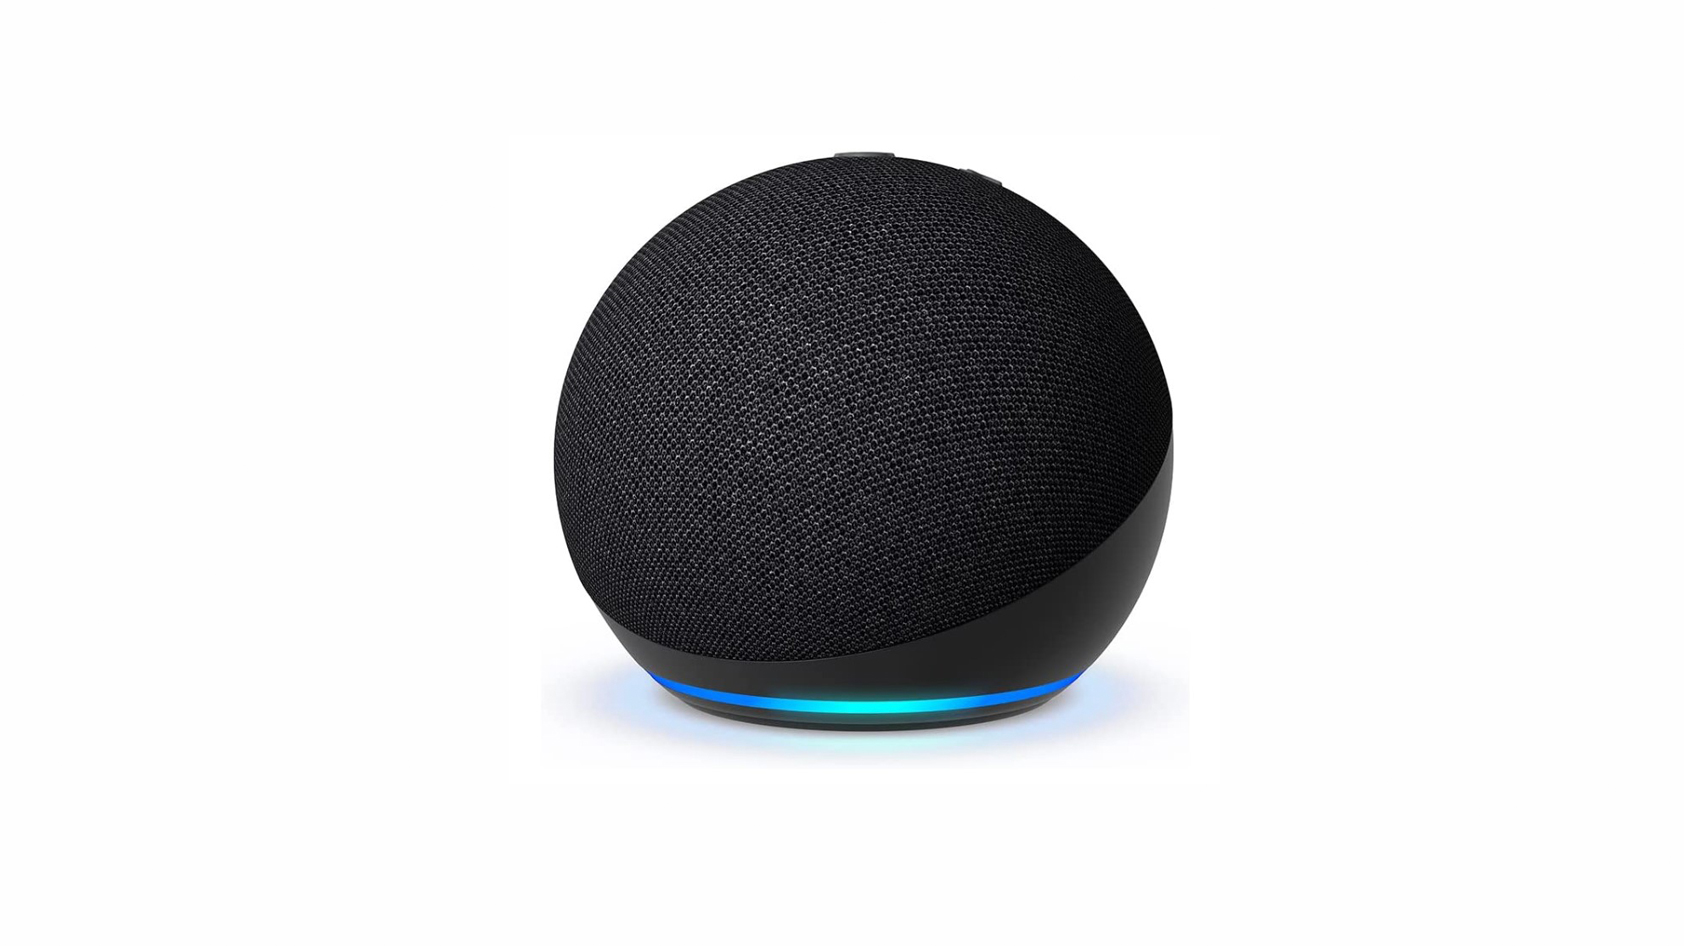 Product image of a Amazon Echo Dot 5th gen on a white background